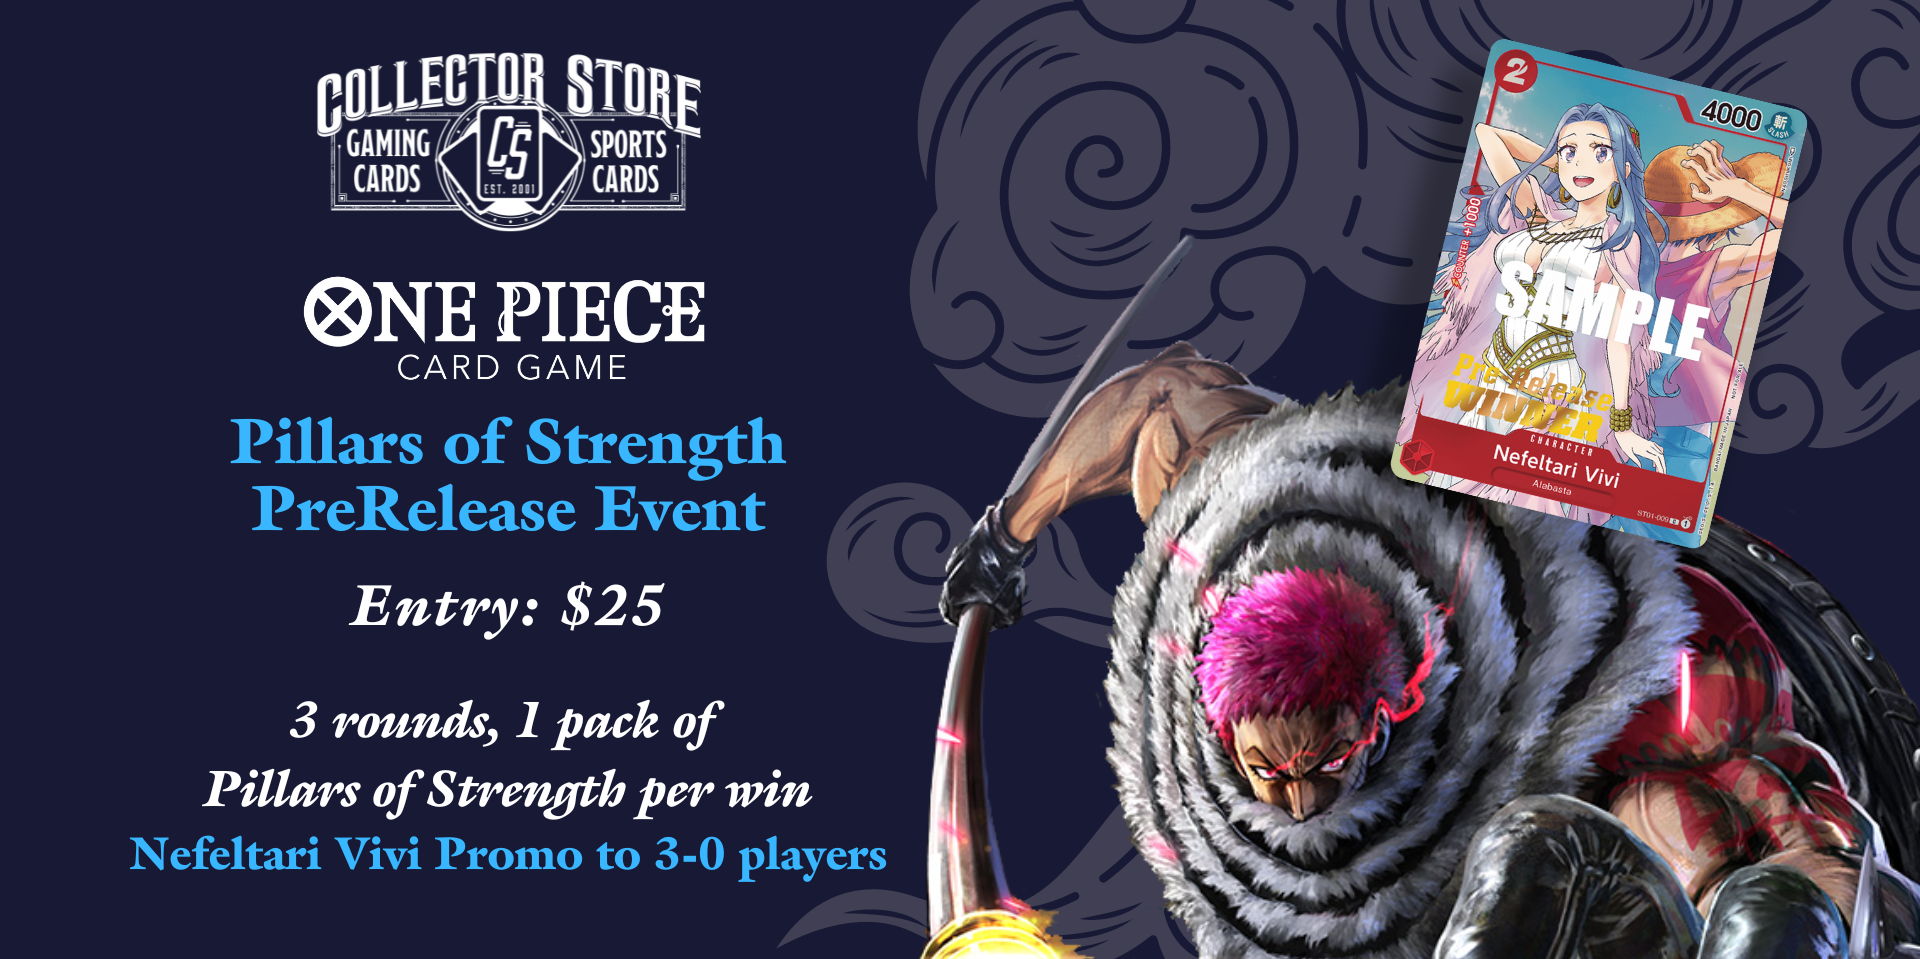 One Piece Pillars of Strength Prerelease promotional image